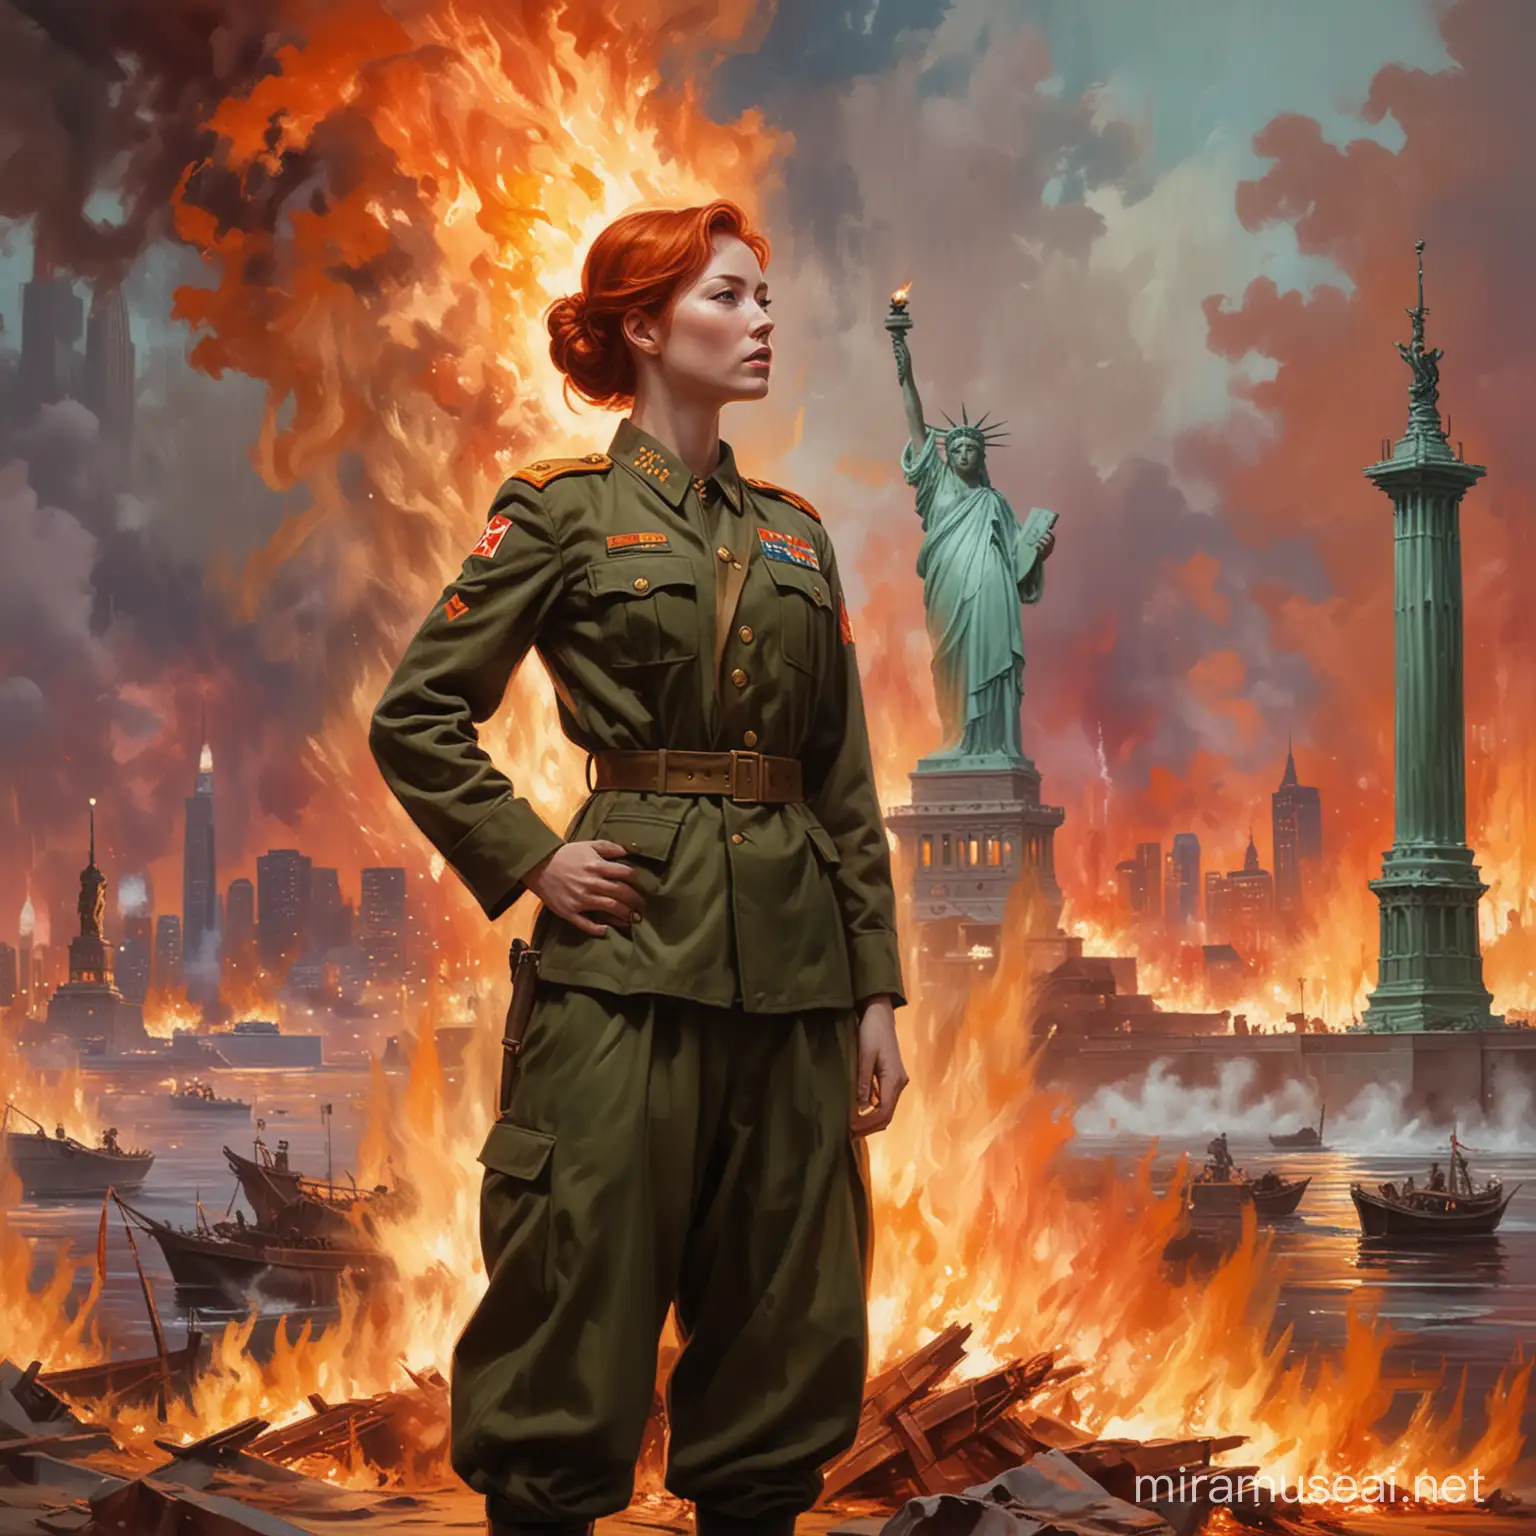 RedHaired Woman in North Korean Soldier Uniform amidst Statue of Liberty Flames